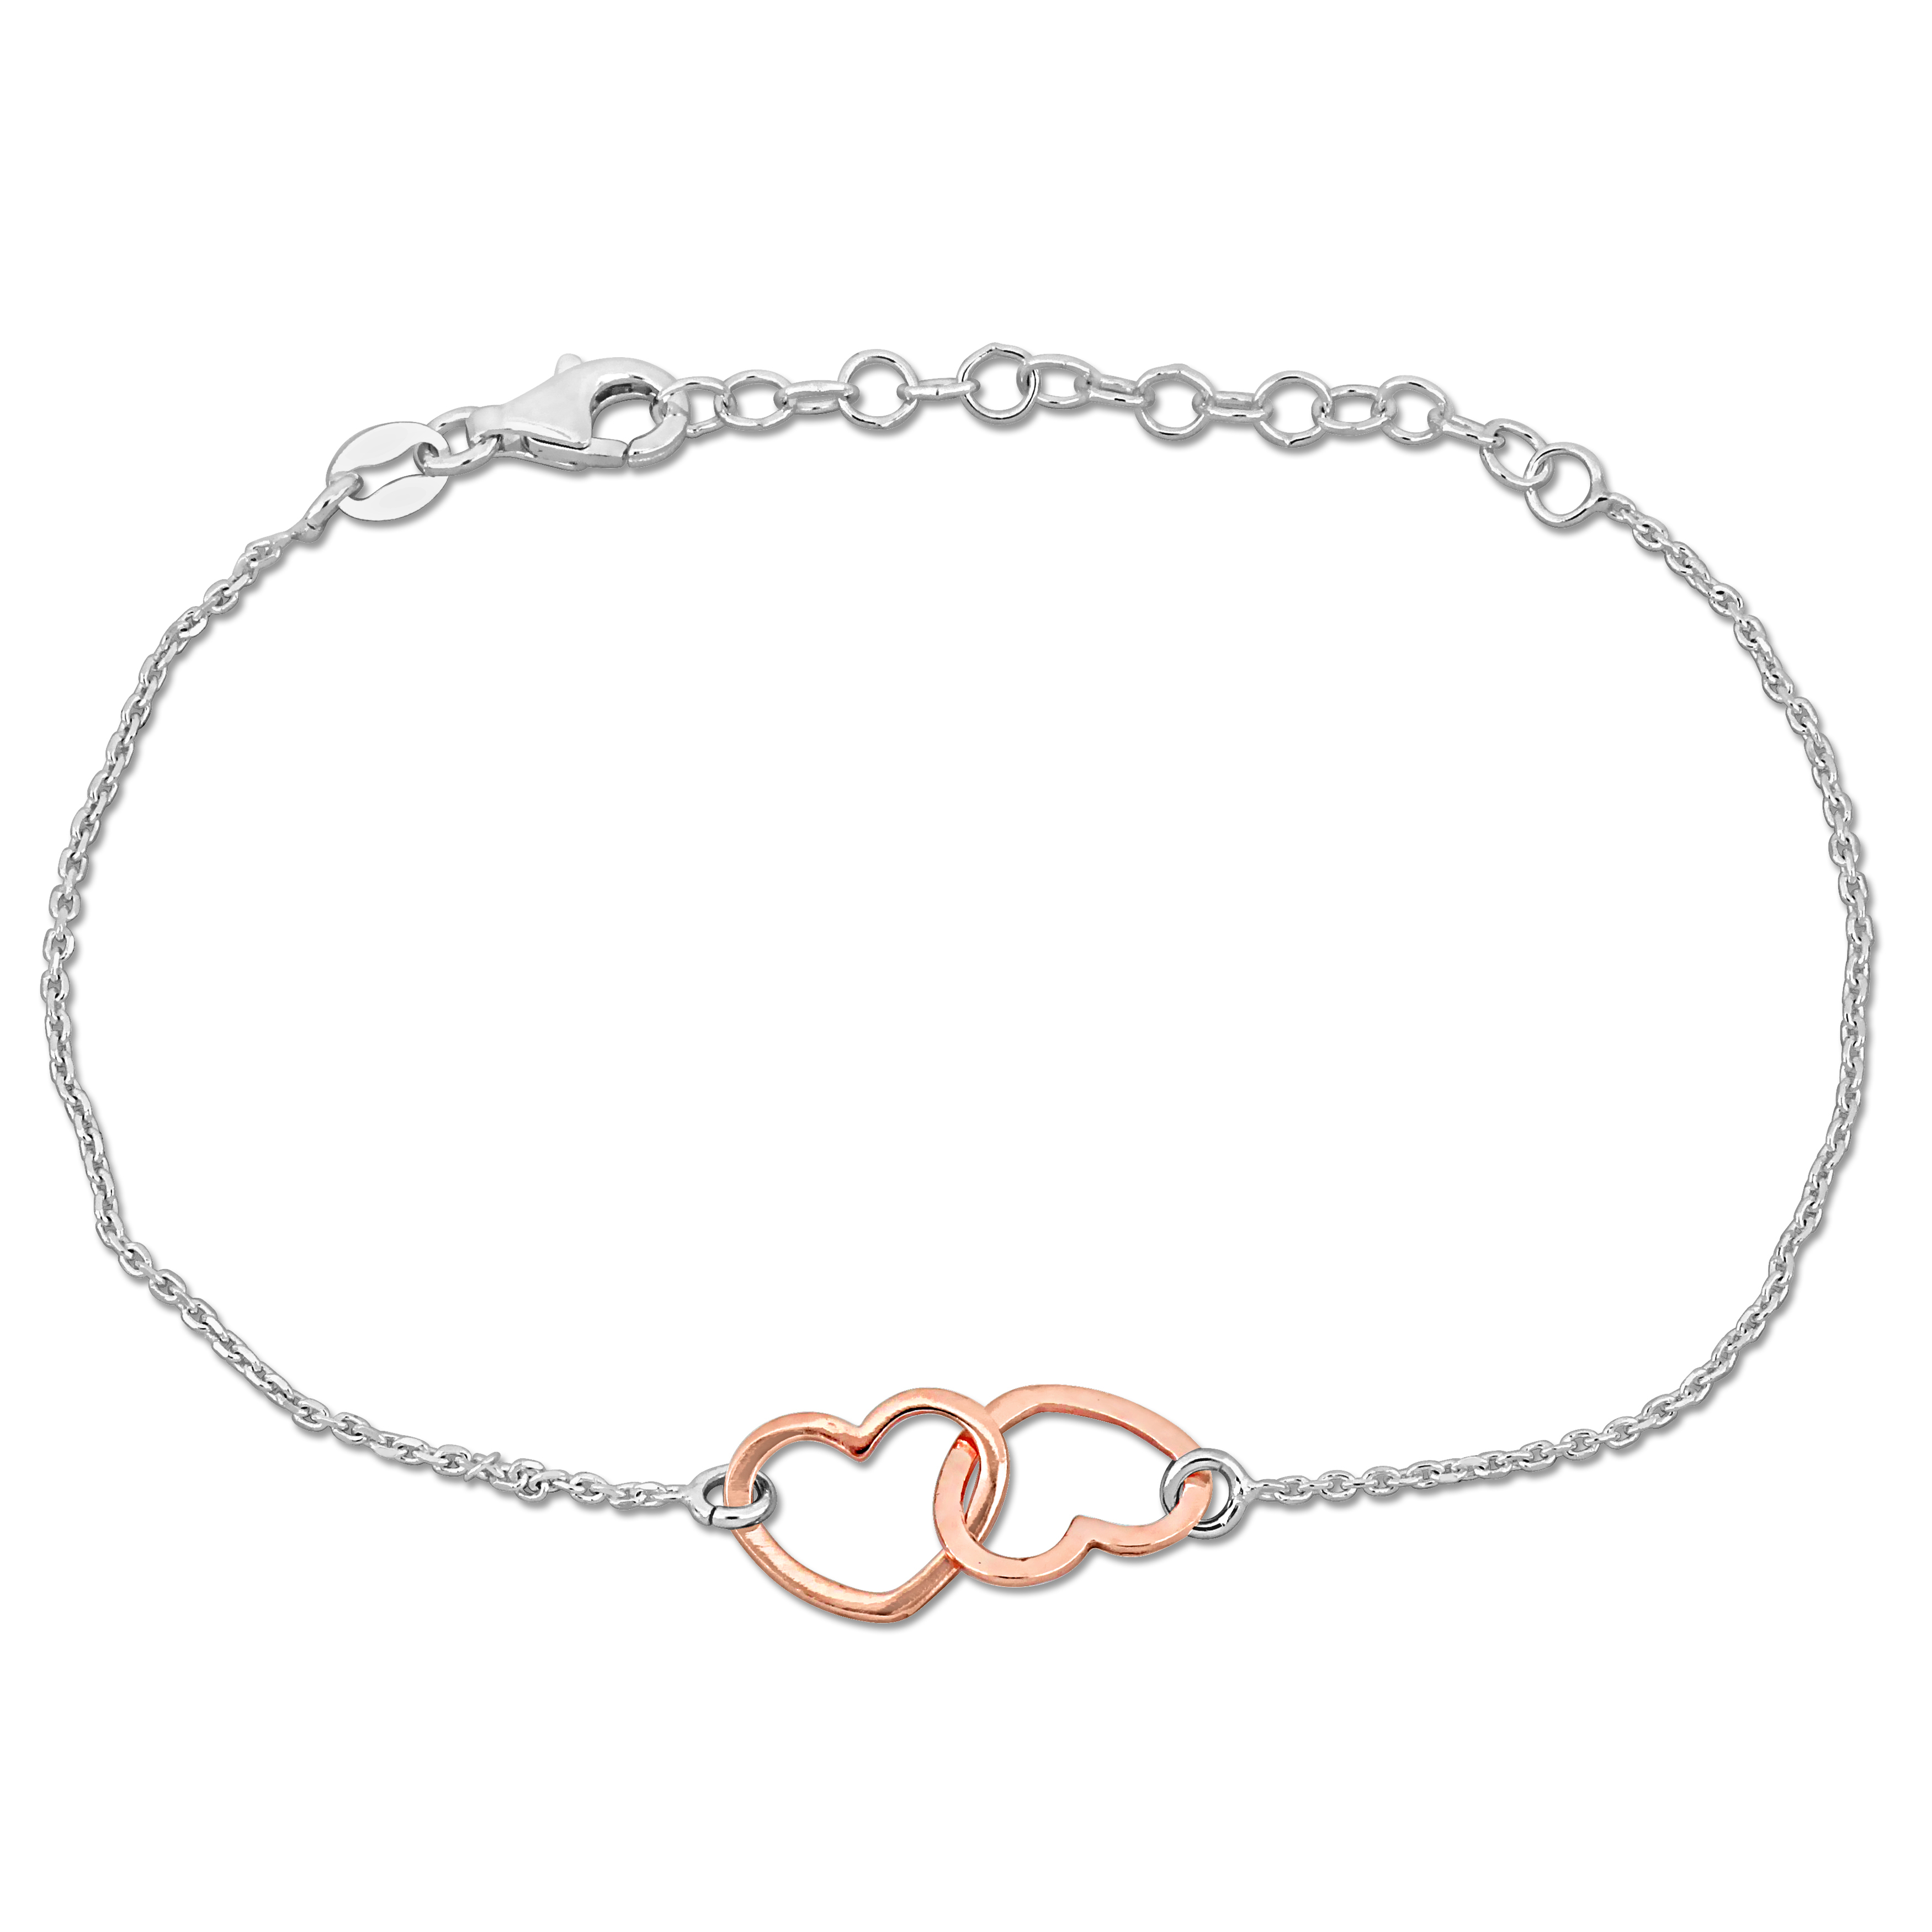 Double Rose Heart Charm Bracelet in Rose and Sterling Silver - 7+1 in.